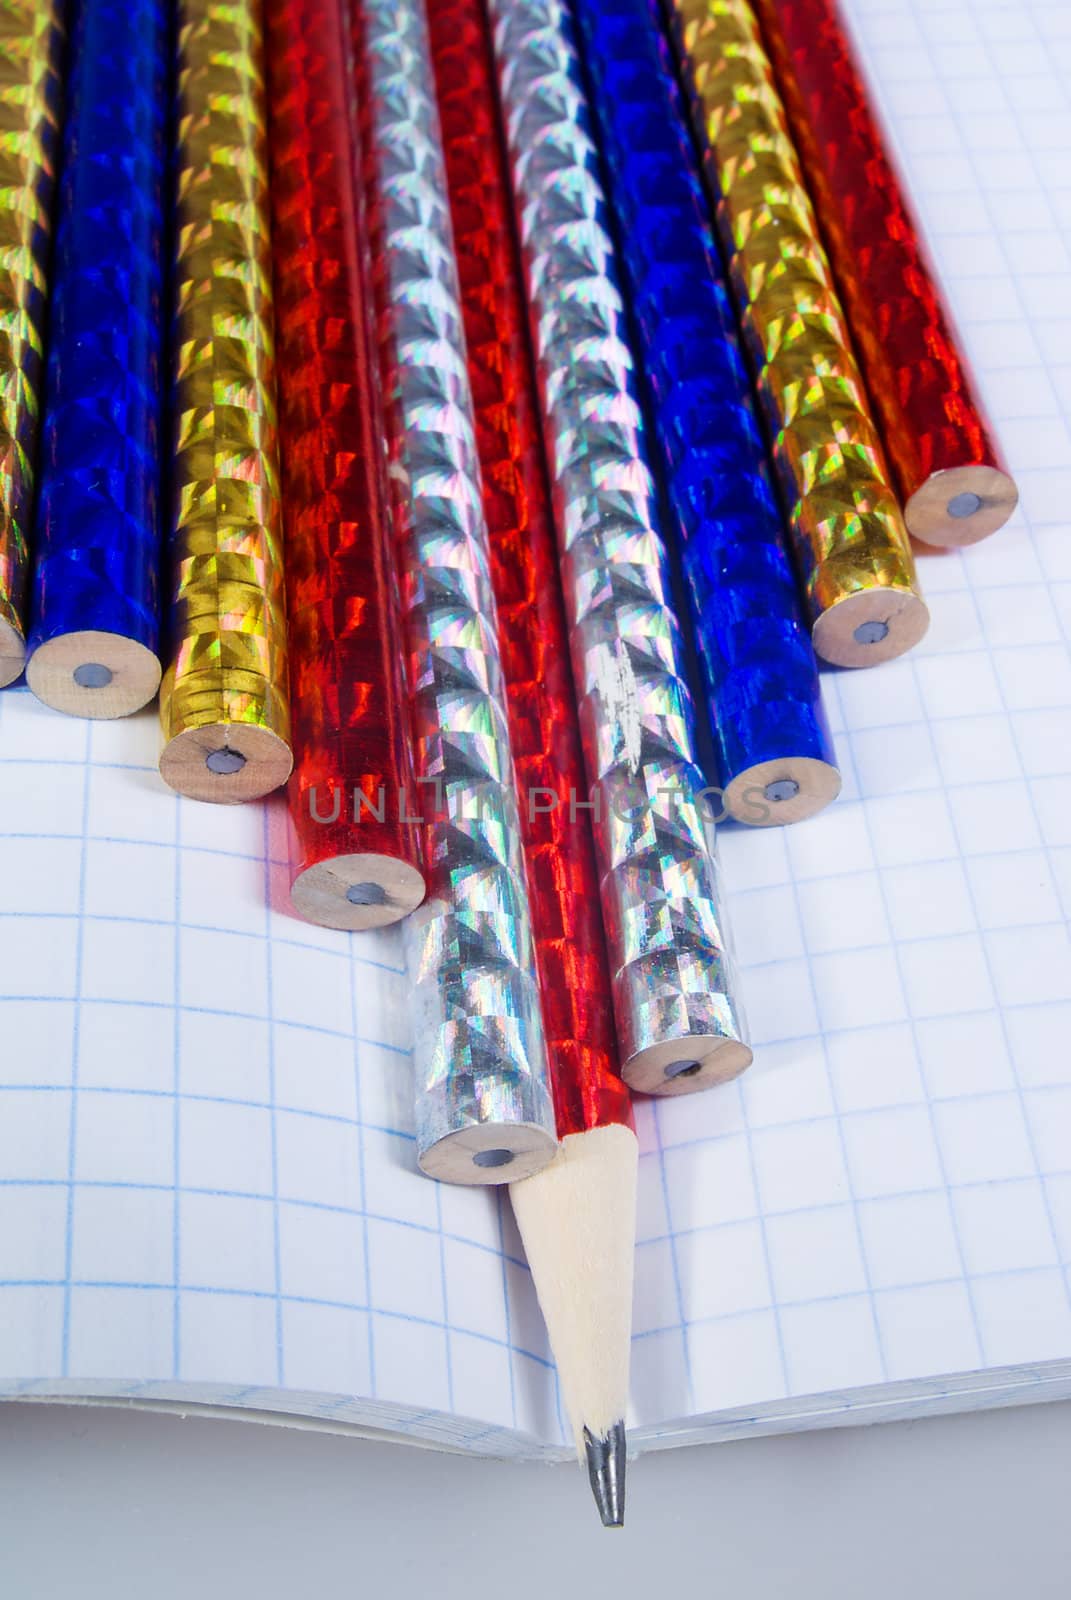 Multi-colored pencils on a writing-book